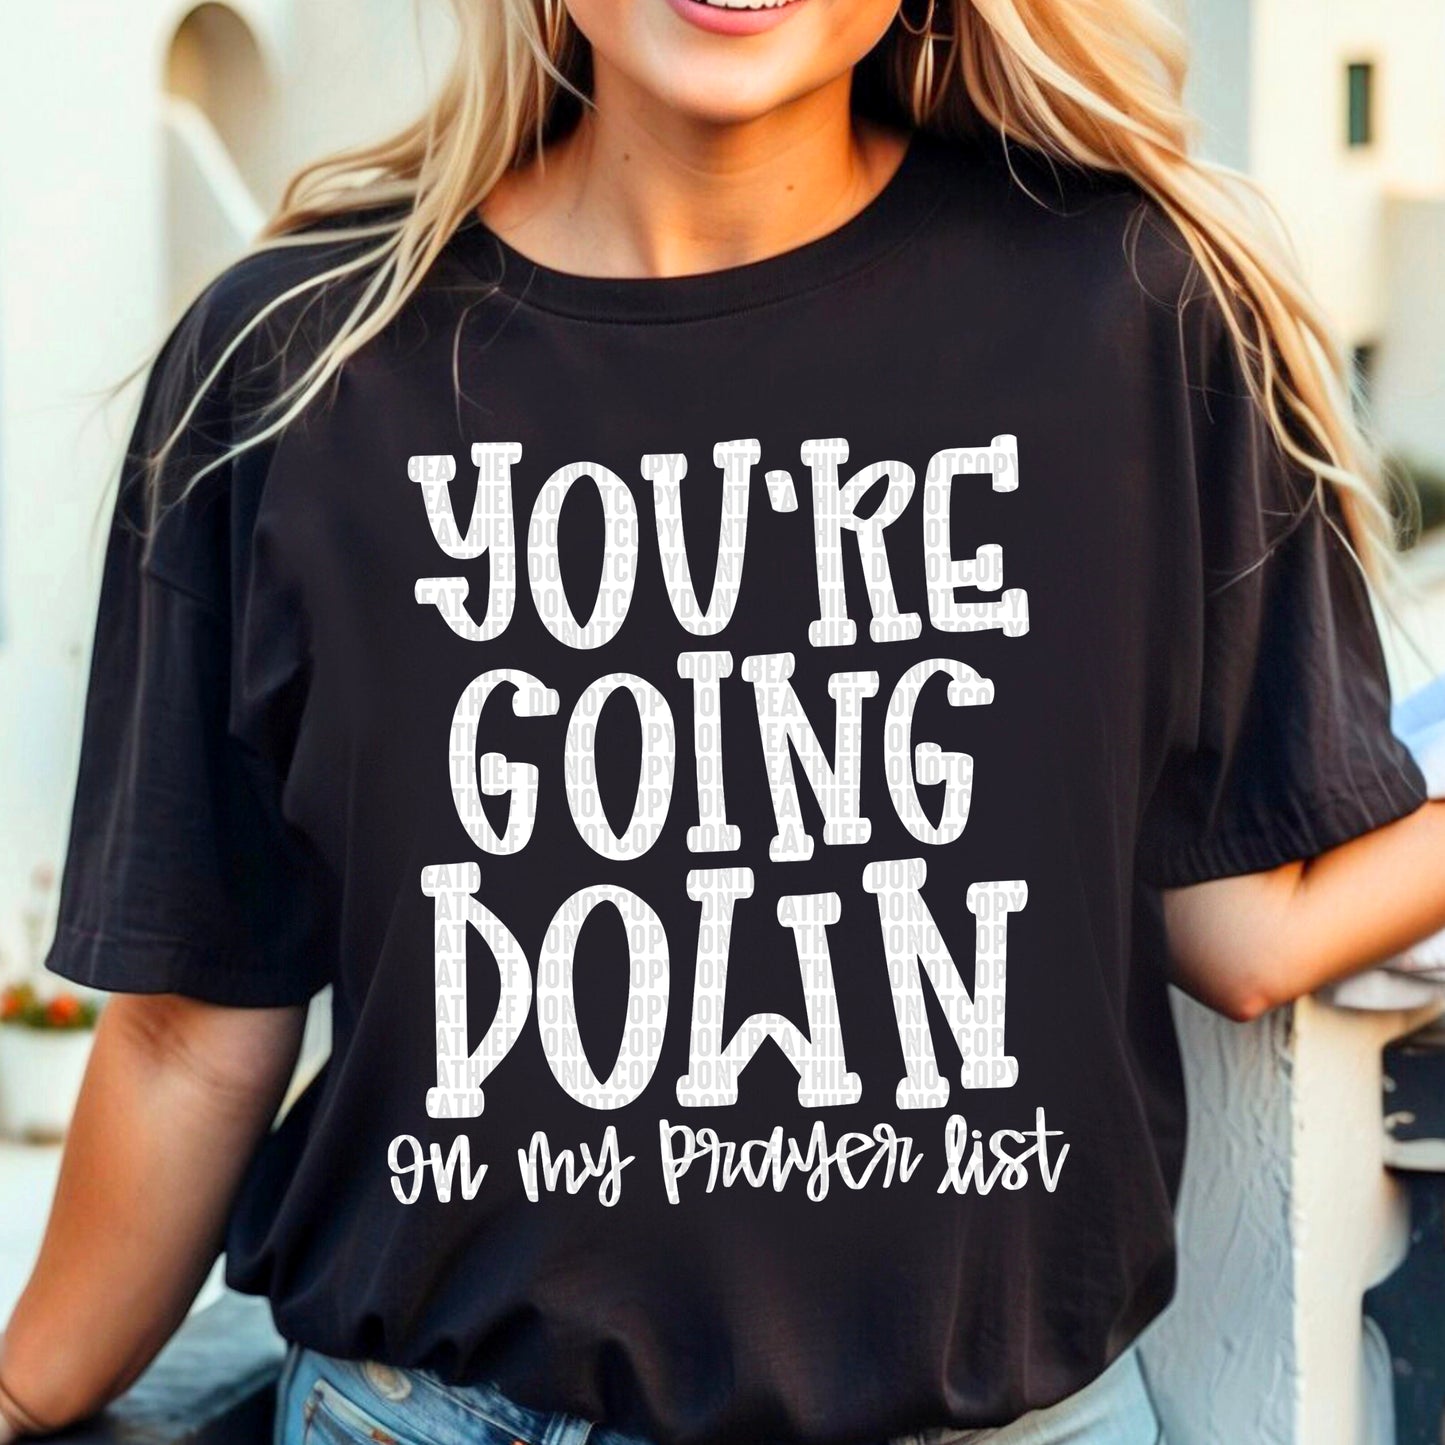 You're Going Down (on my prayer list) Bundle